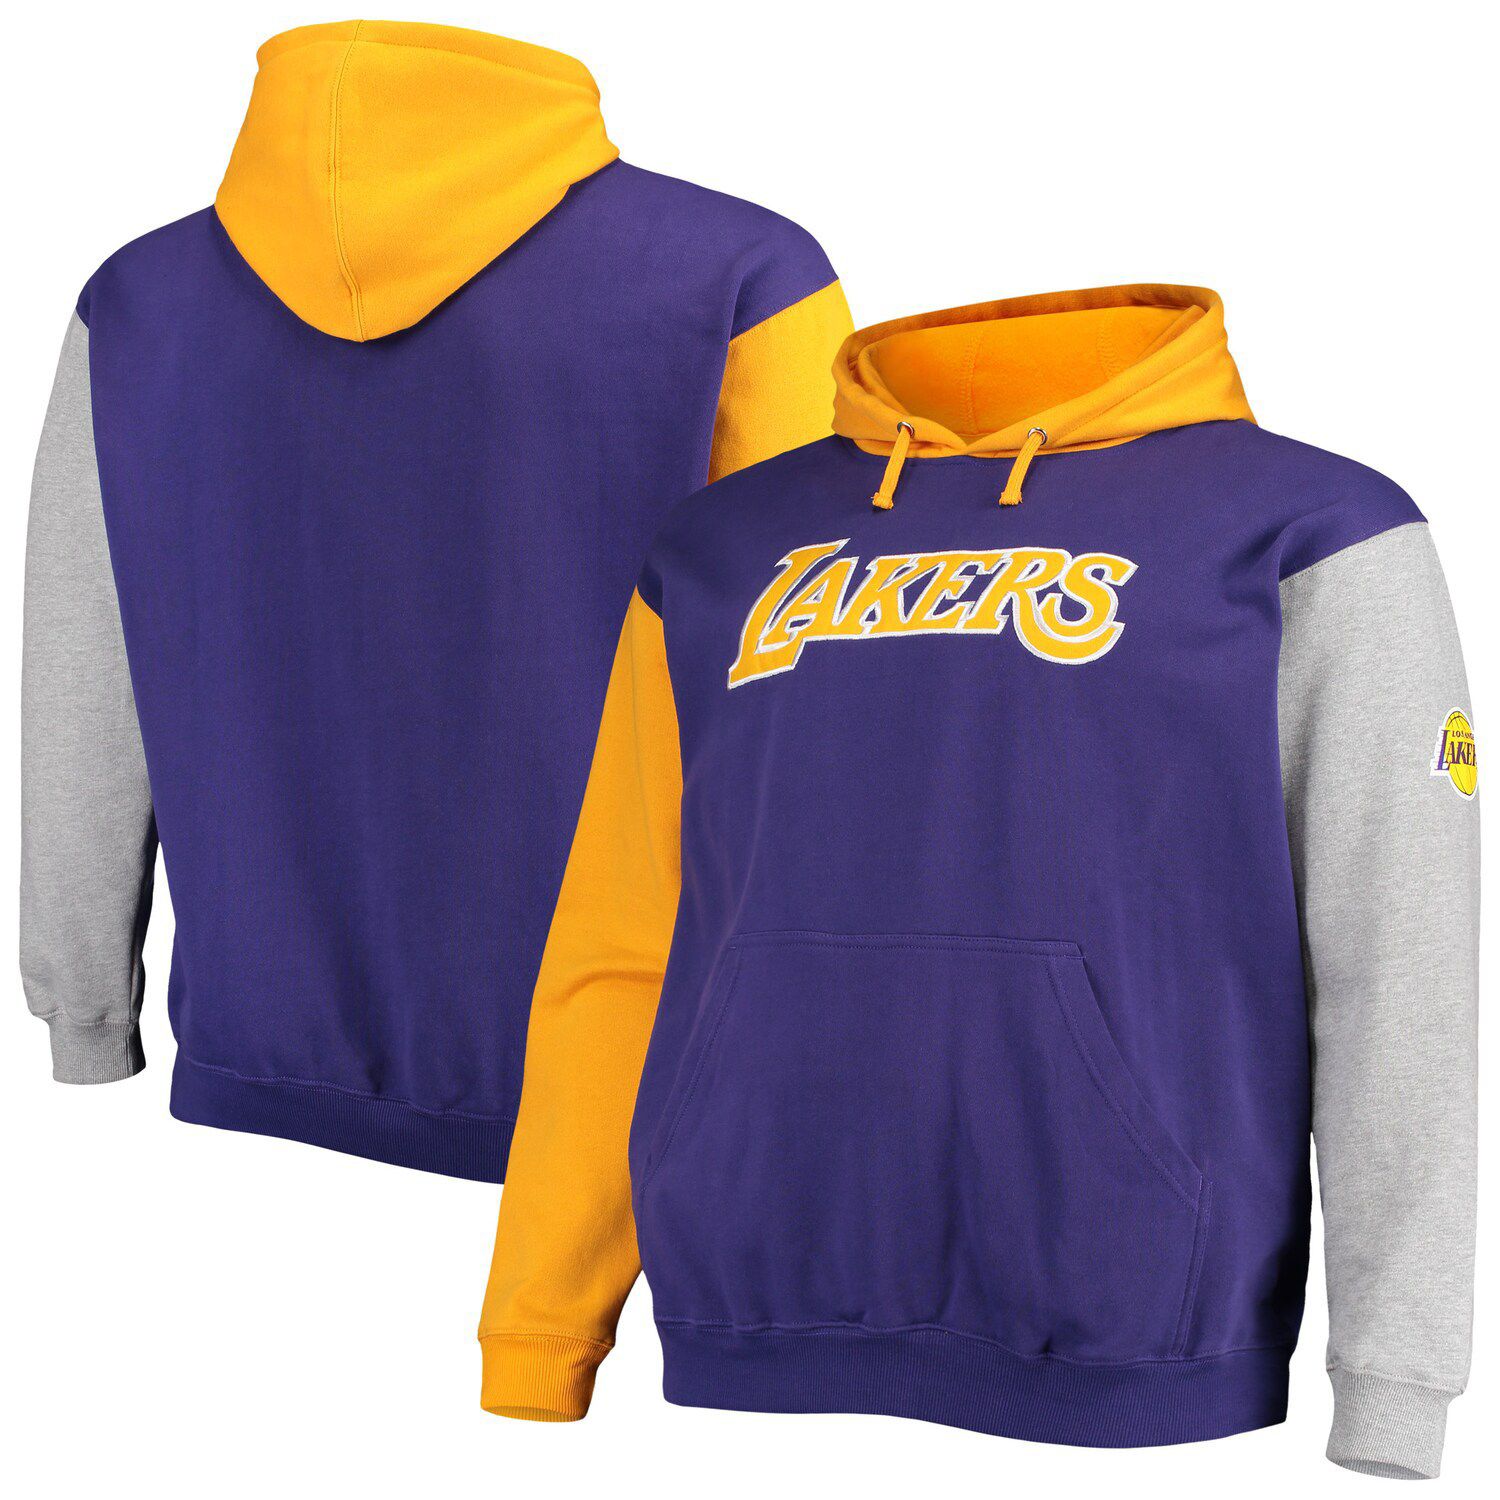 Fanatics Branded Men's Heathered Gray Los Angeles Lakers Team Primary Logo Pullover Hoodie - Heather Gray